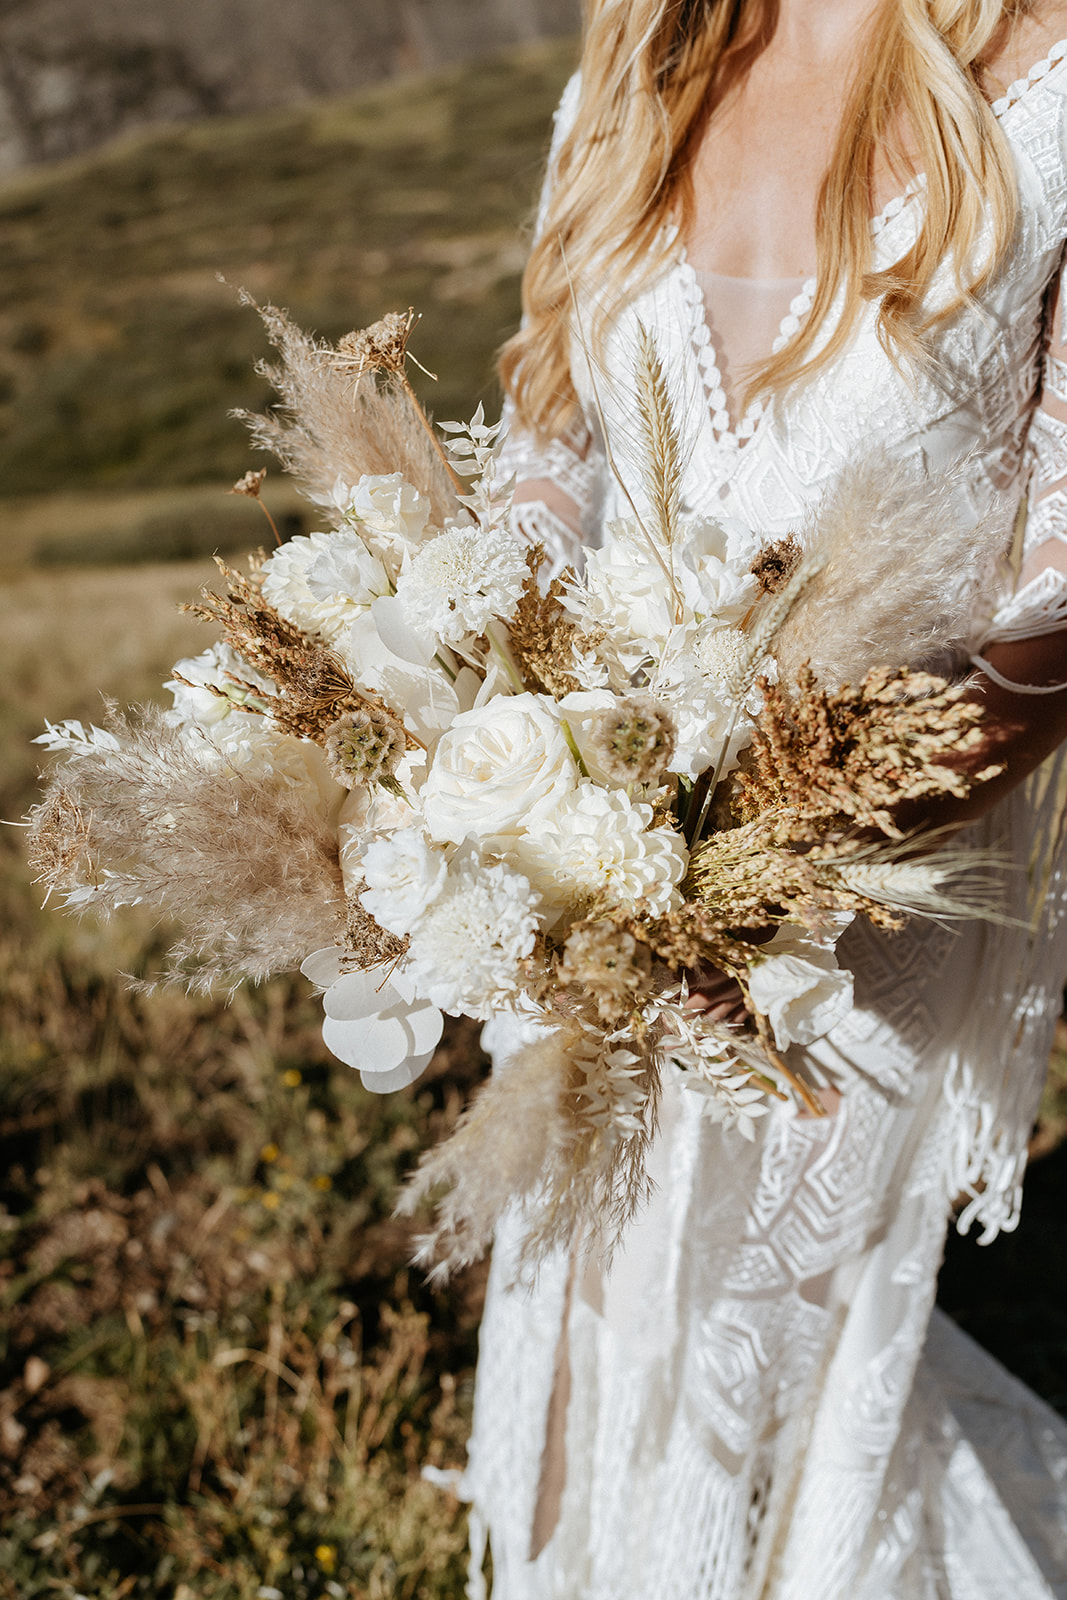 Details of a bride in an embroidered dress holding a boho white rose bouquet